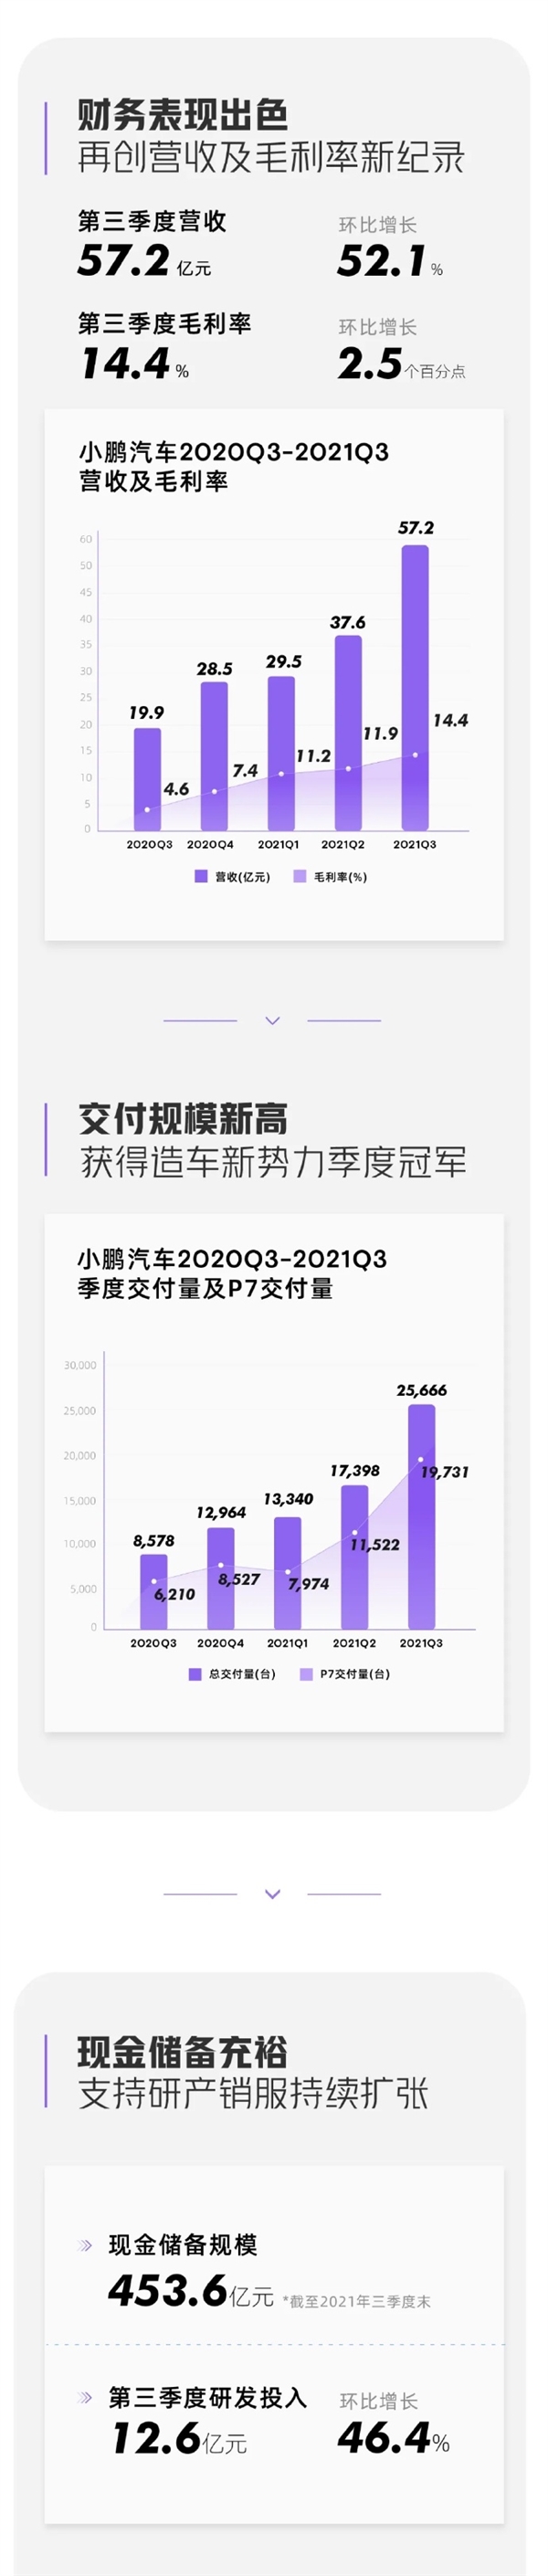 Xiaopeng Automobile's third-quarter revenue increased by 187.4%, and its net loss of 1.595 billion yuan narrowed year-on-year